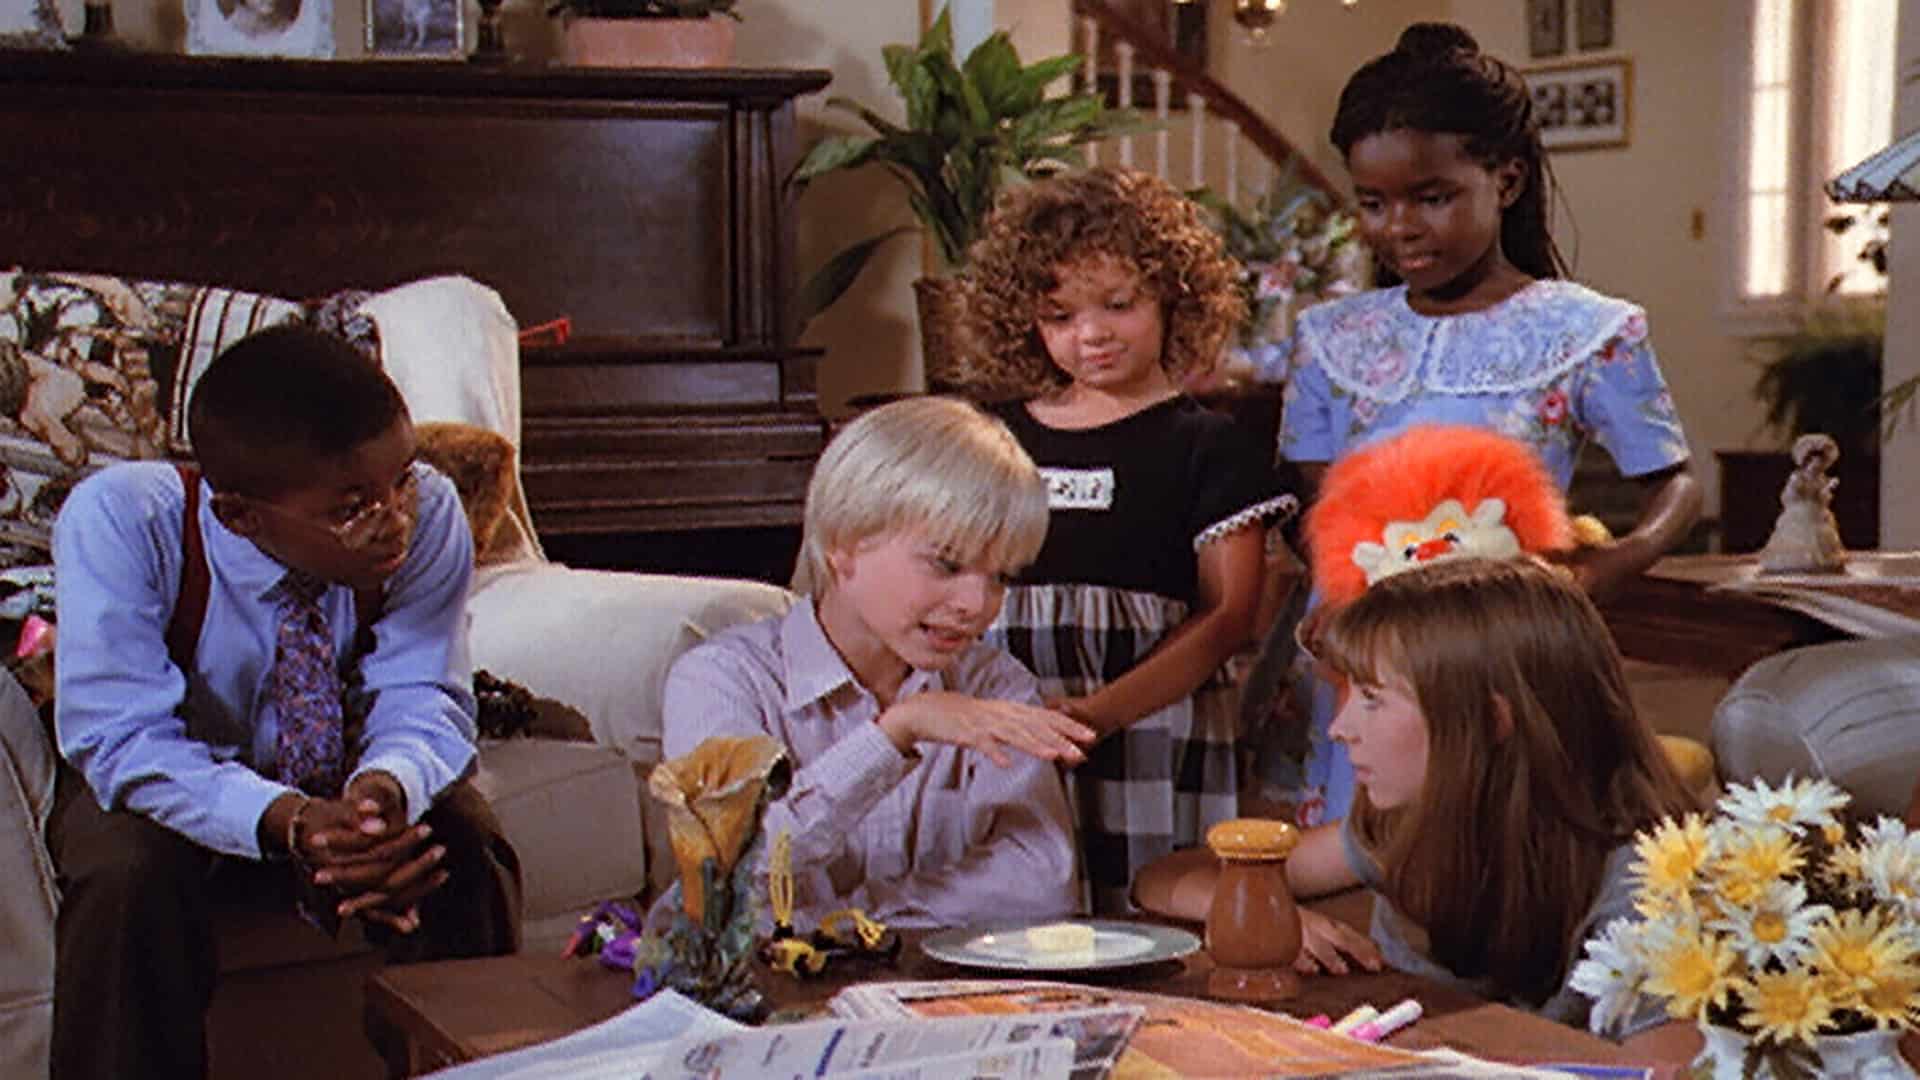 A group of children dressed for church gather around a coffee table in this photo from Spelling Television.